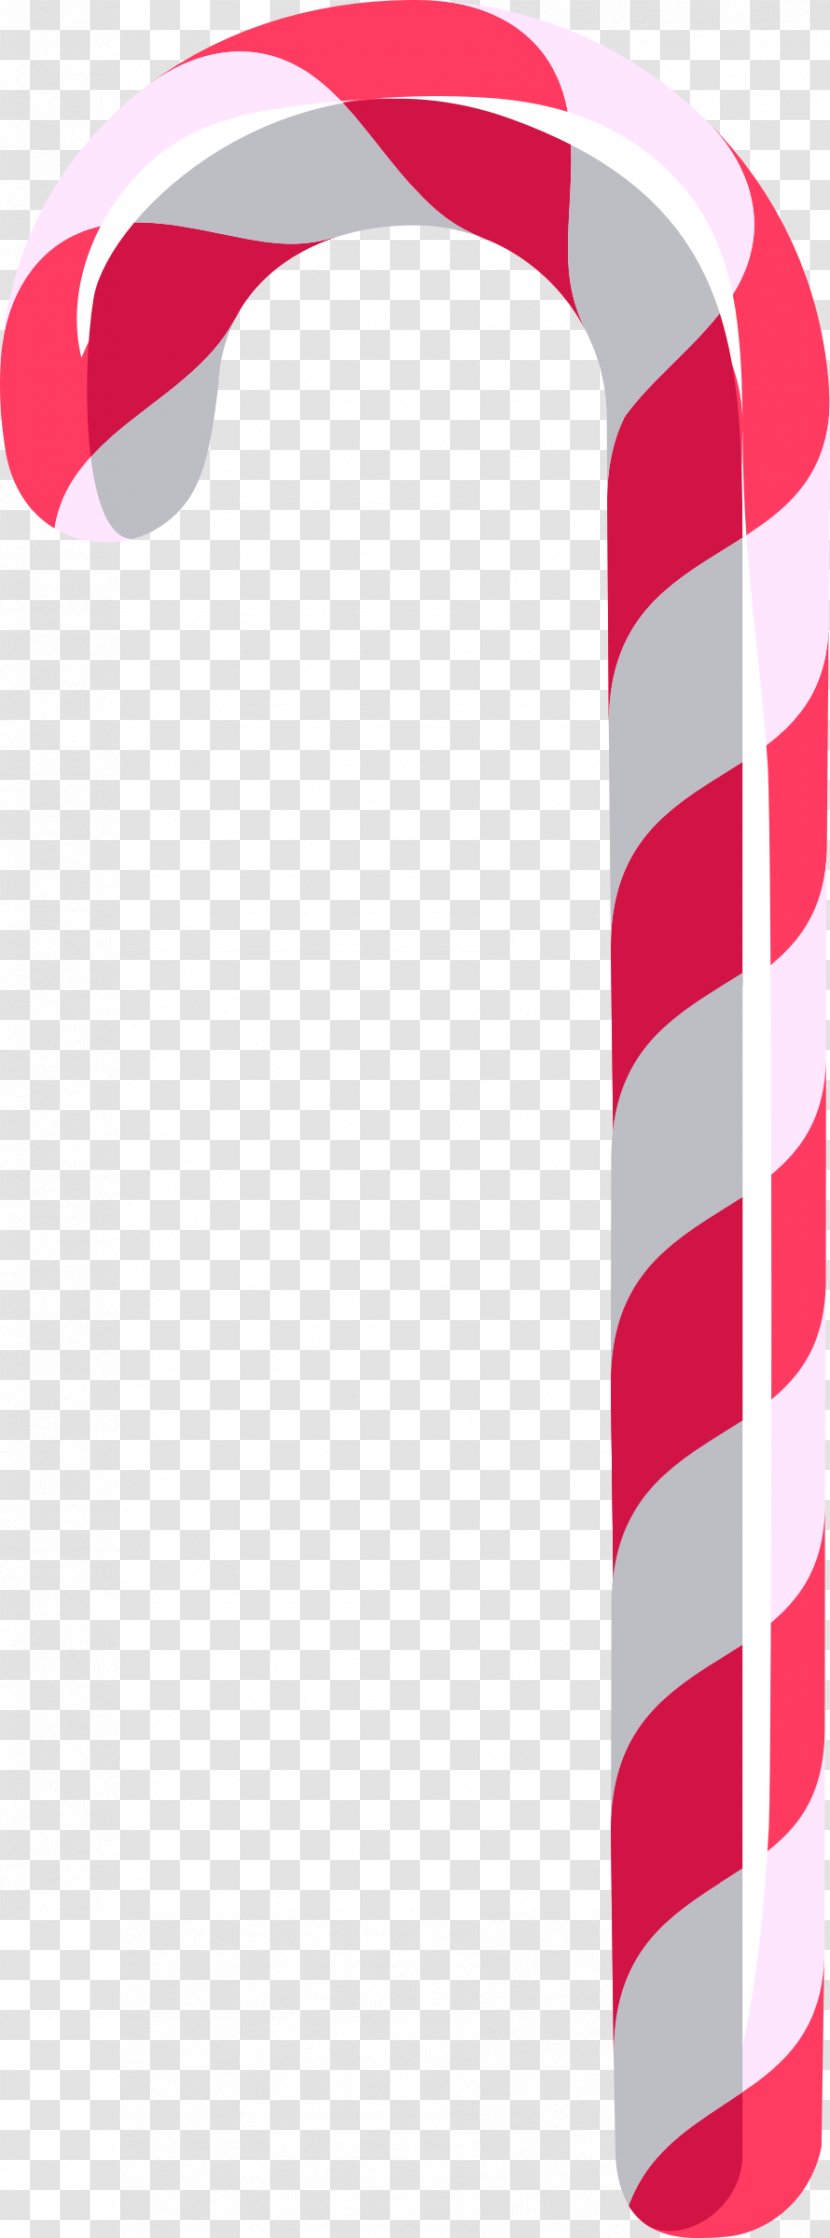 Candy Cane Stick Drawing Clip Art - Pink Transparent PNG